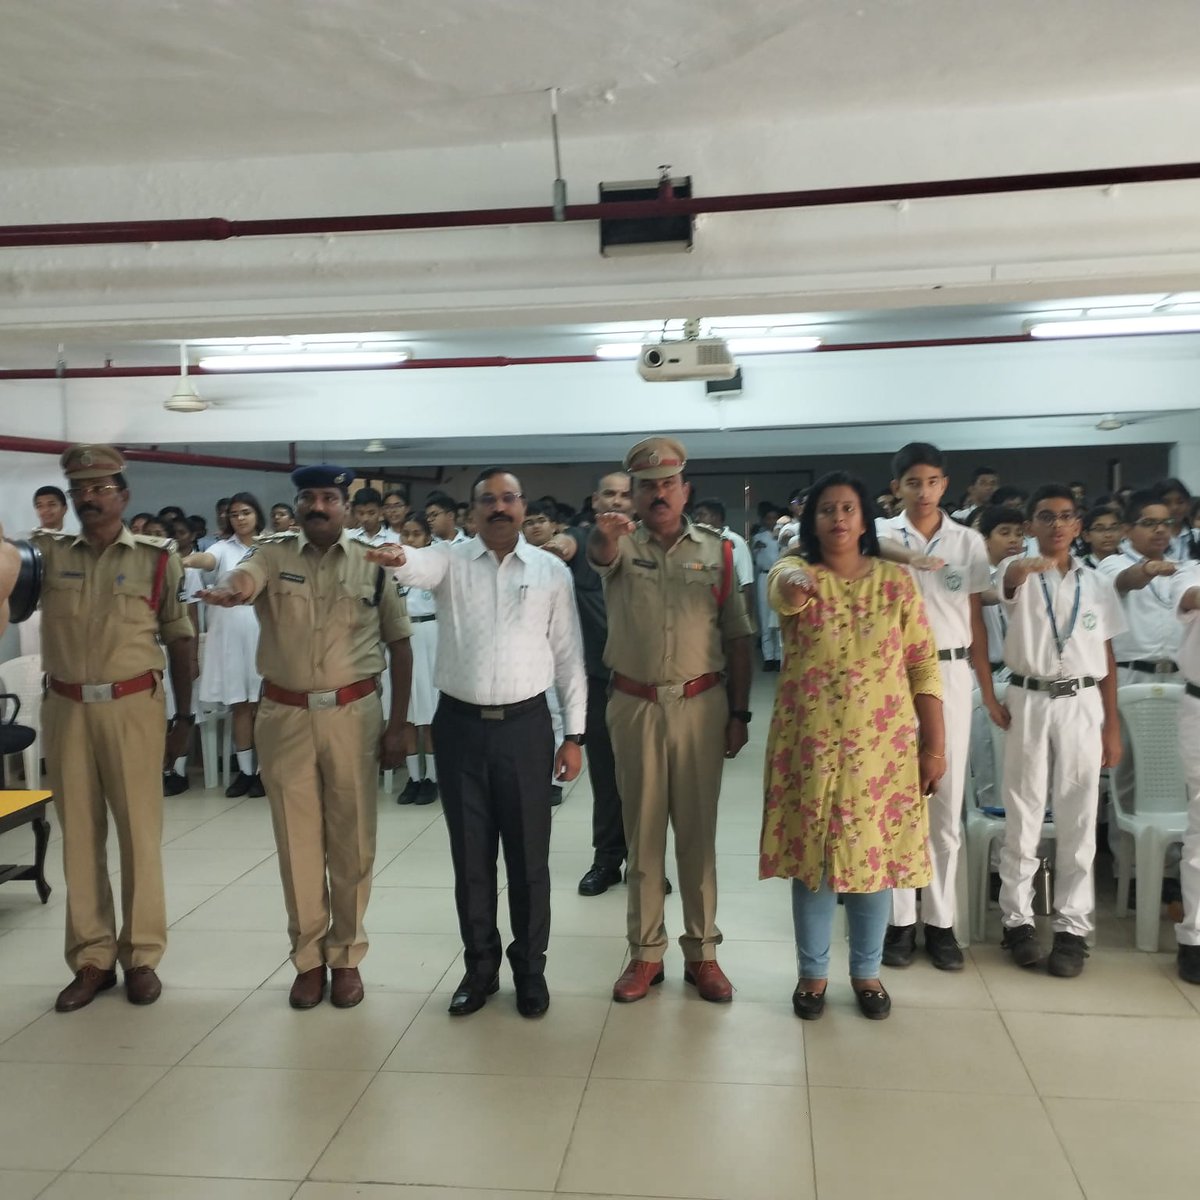 TSNAB with community educators conducted awareness program at @DPSSecunderabad.The session was to educate effects of Drug consumption&its serious consequences&was attended by Sri A.Bhaskar SP,TSNAB.@TelanganaDGP @director_tsnab @narcoticsbureau @RachakondaCop #drugfreetelangana